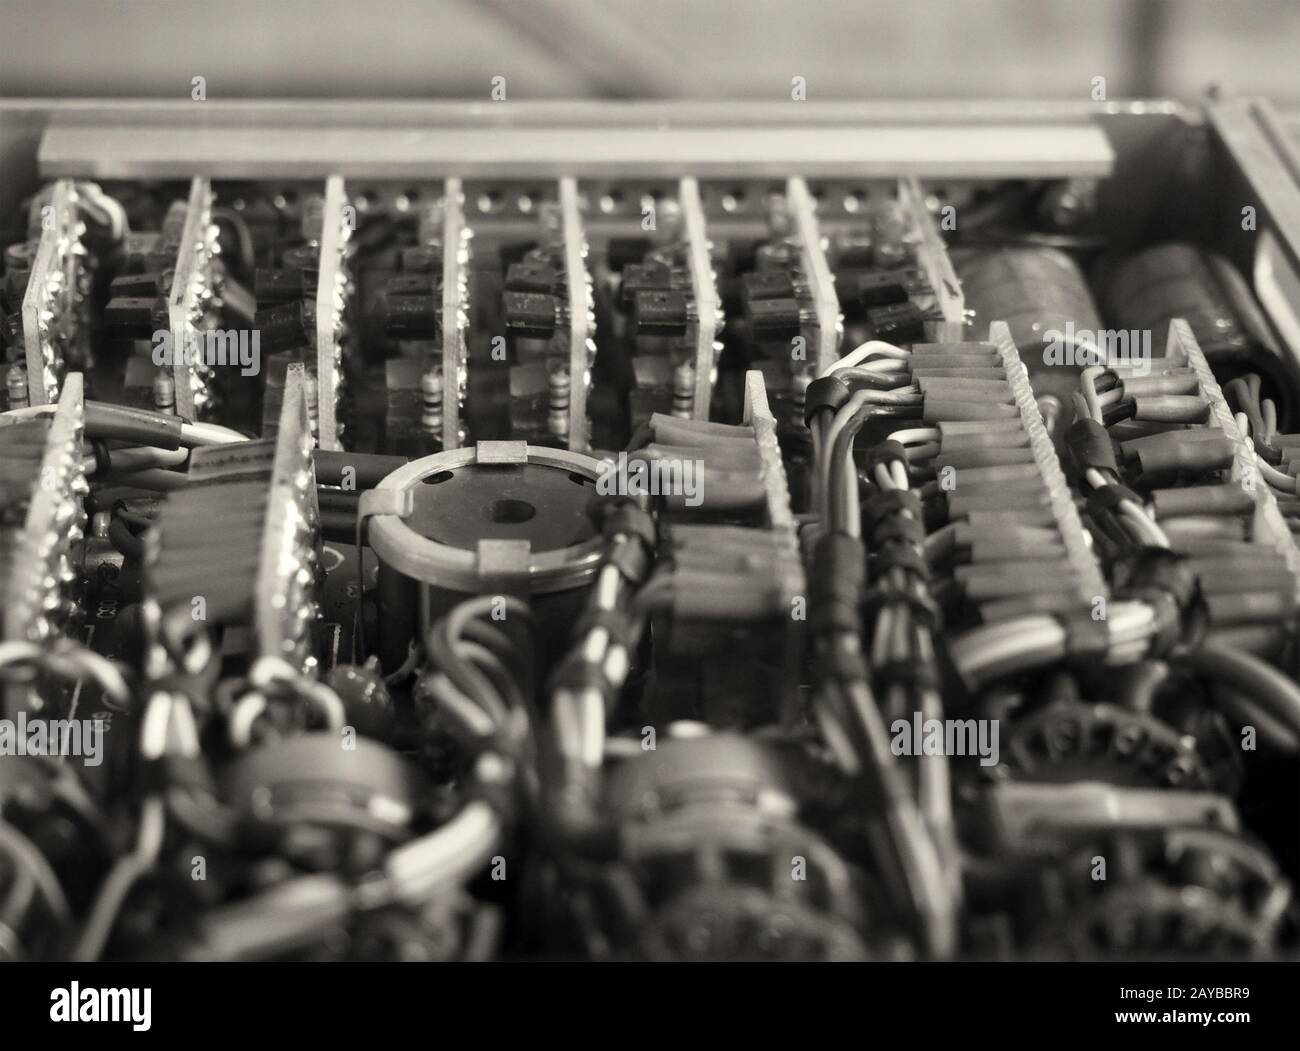 monochrome selective focus image of complex colored wiring and connectors joining circuit boards with electrical components Stock Photo